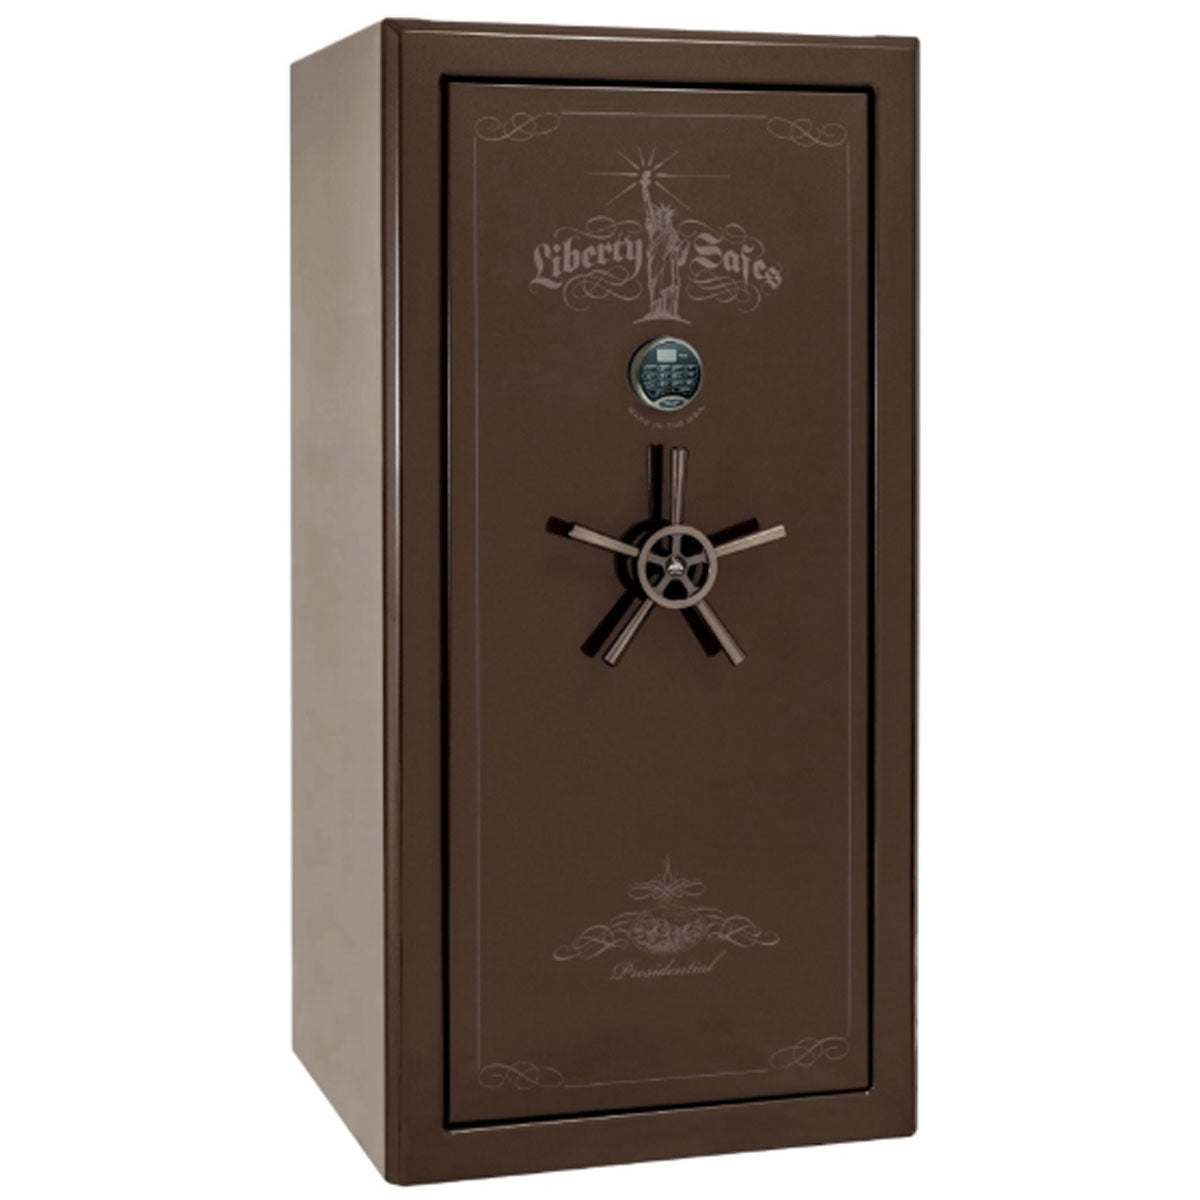 Liberty Safe Presidential 25 in Bronze Gloss with Black Chrome Electronic Lock, closed door.